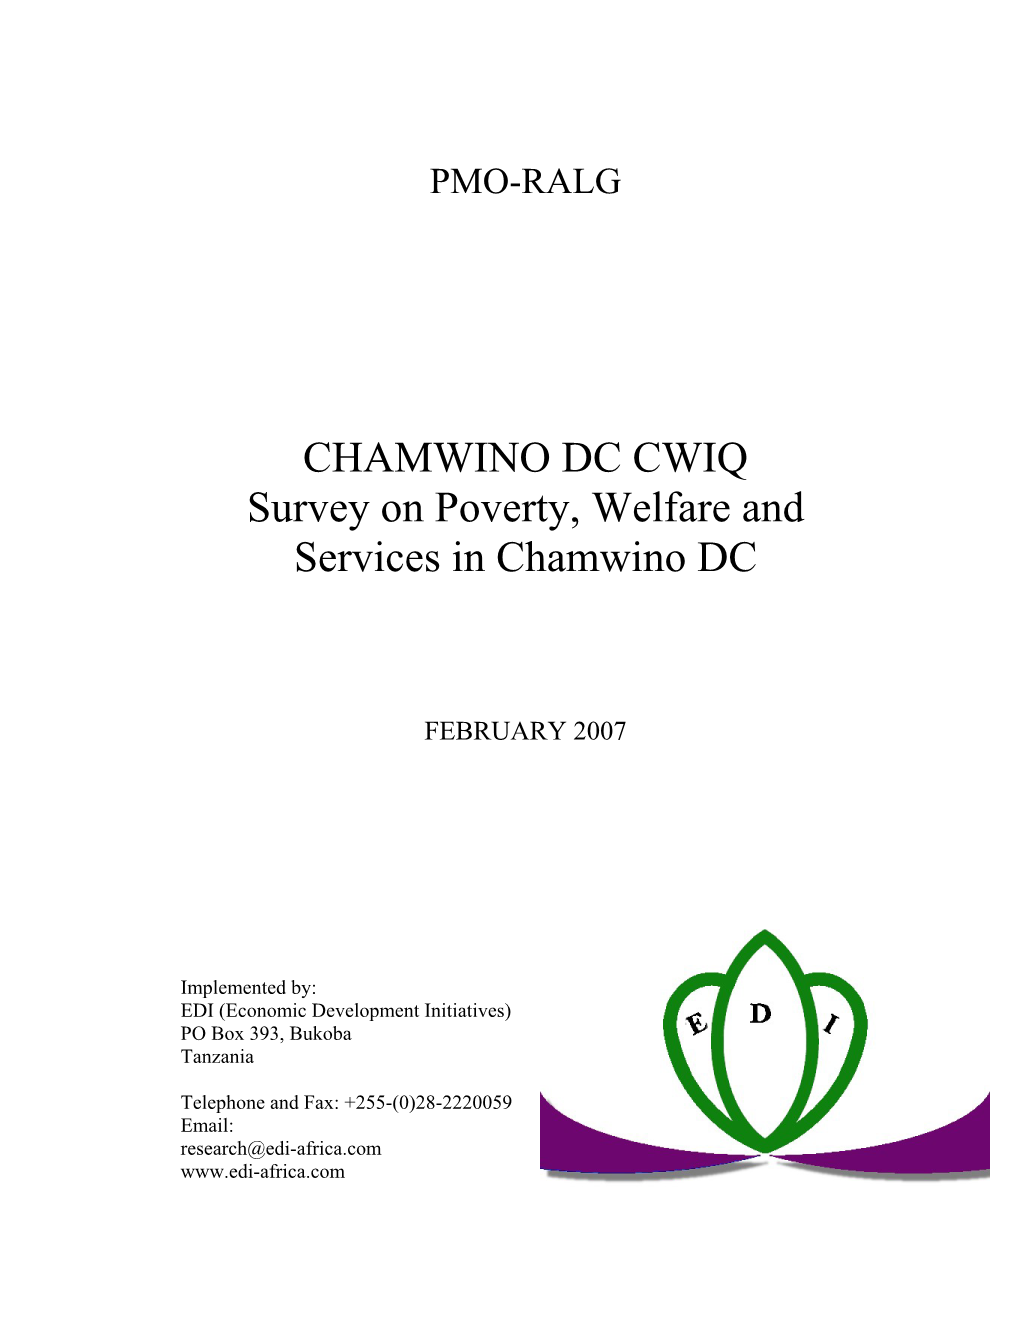 CHAMWINO DC CWIQ Survey on Poverty, Welfare and Services in Chamwino DC